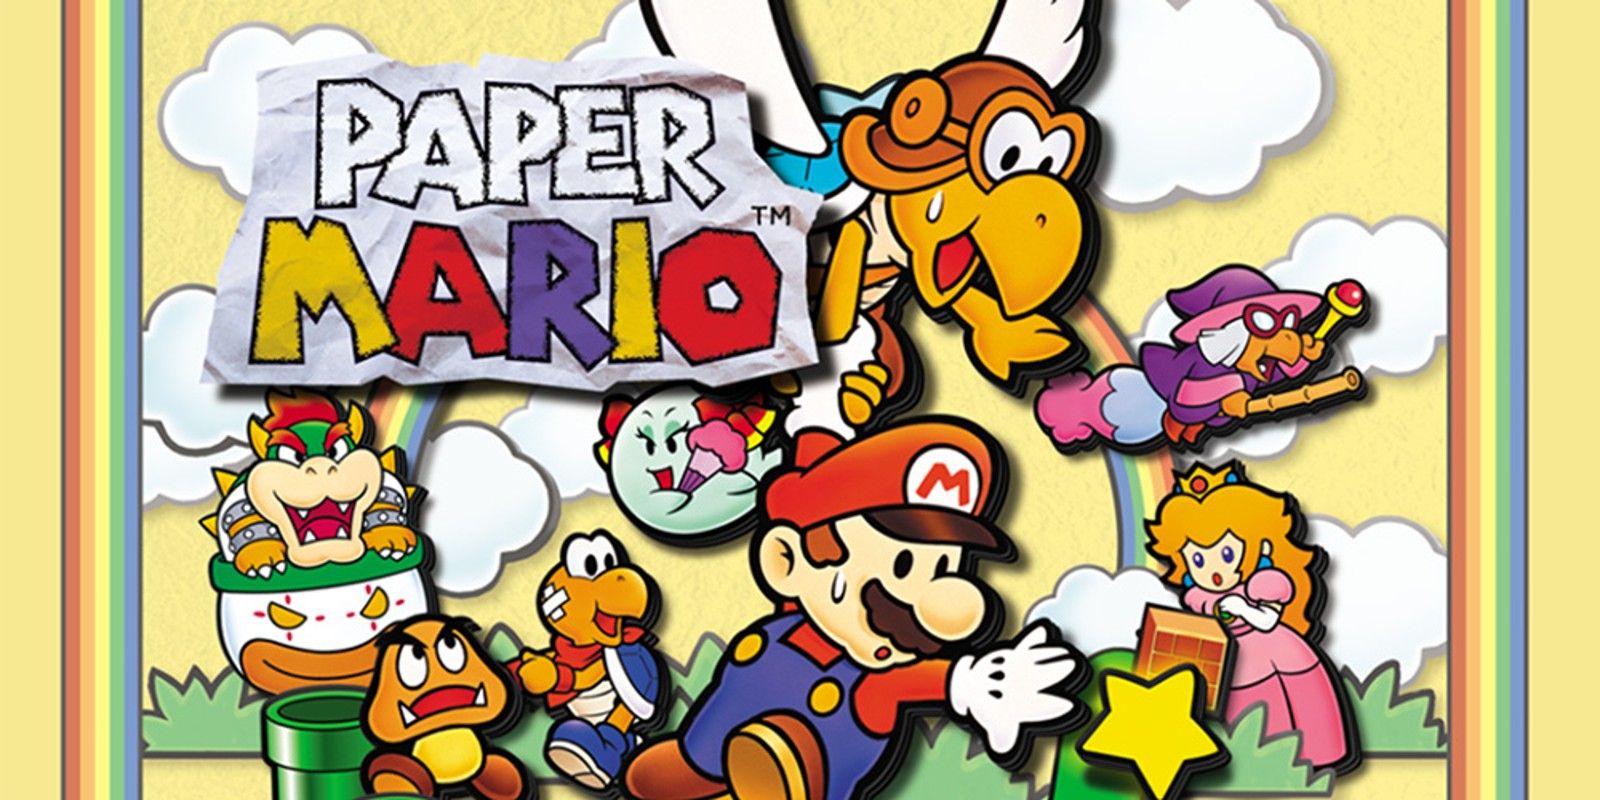 The cover of Paper Mario 64